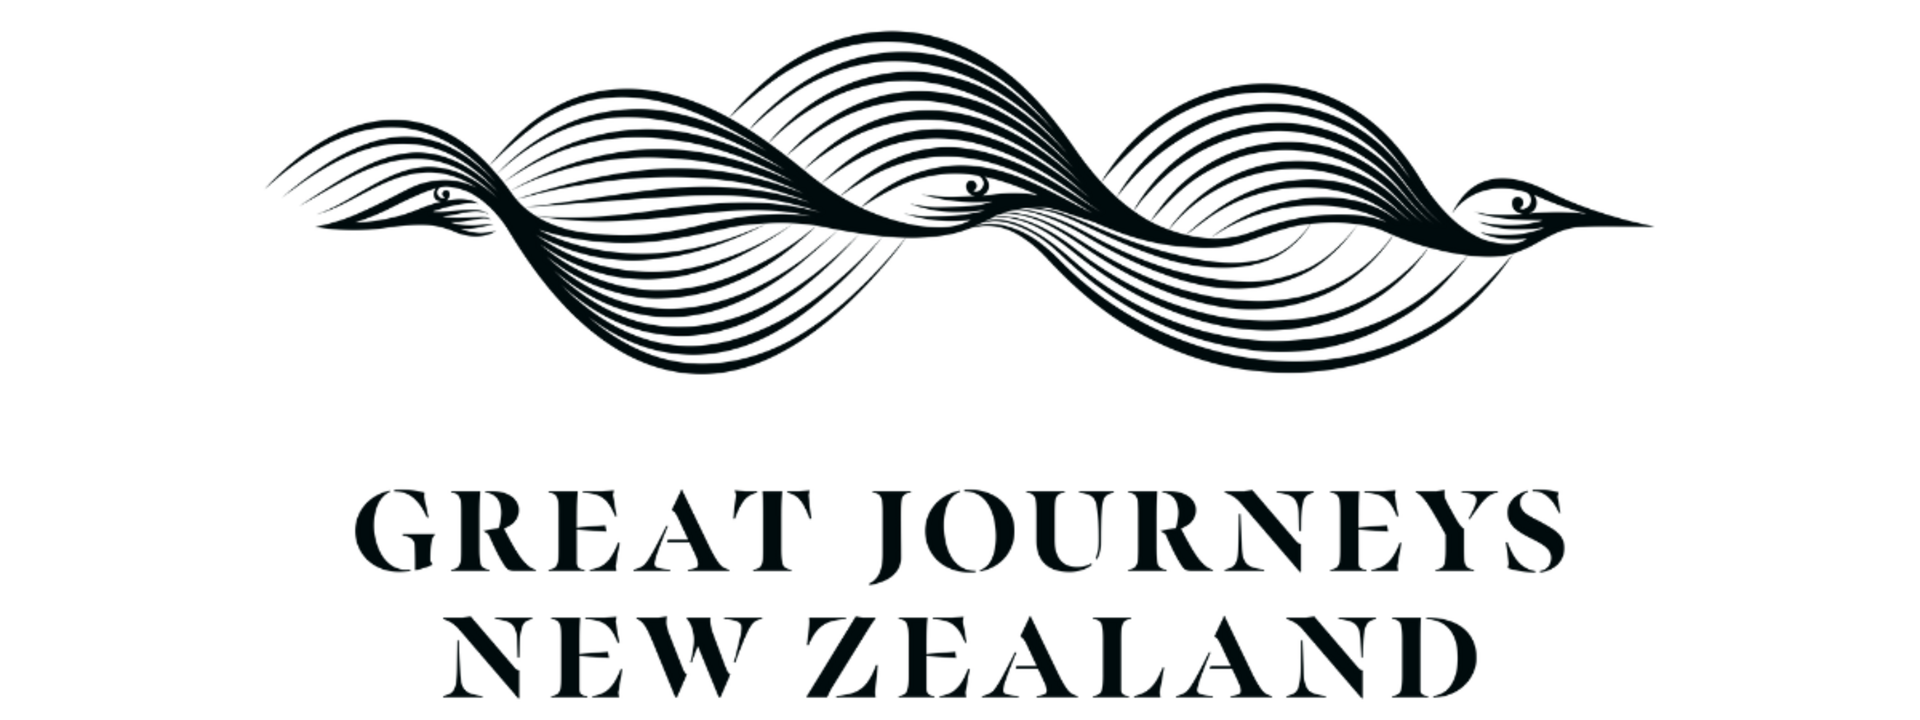 great-journey-nz-new-zealand.png